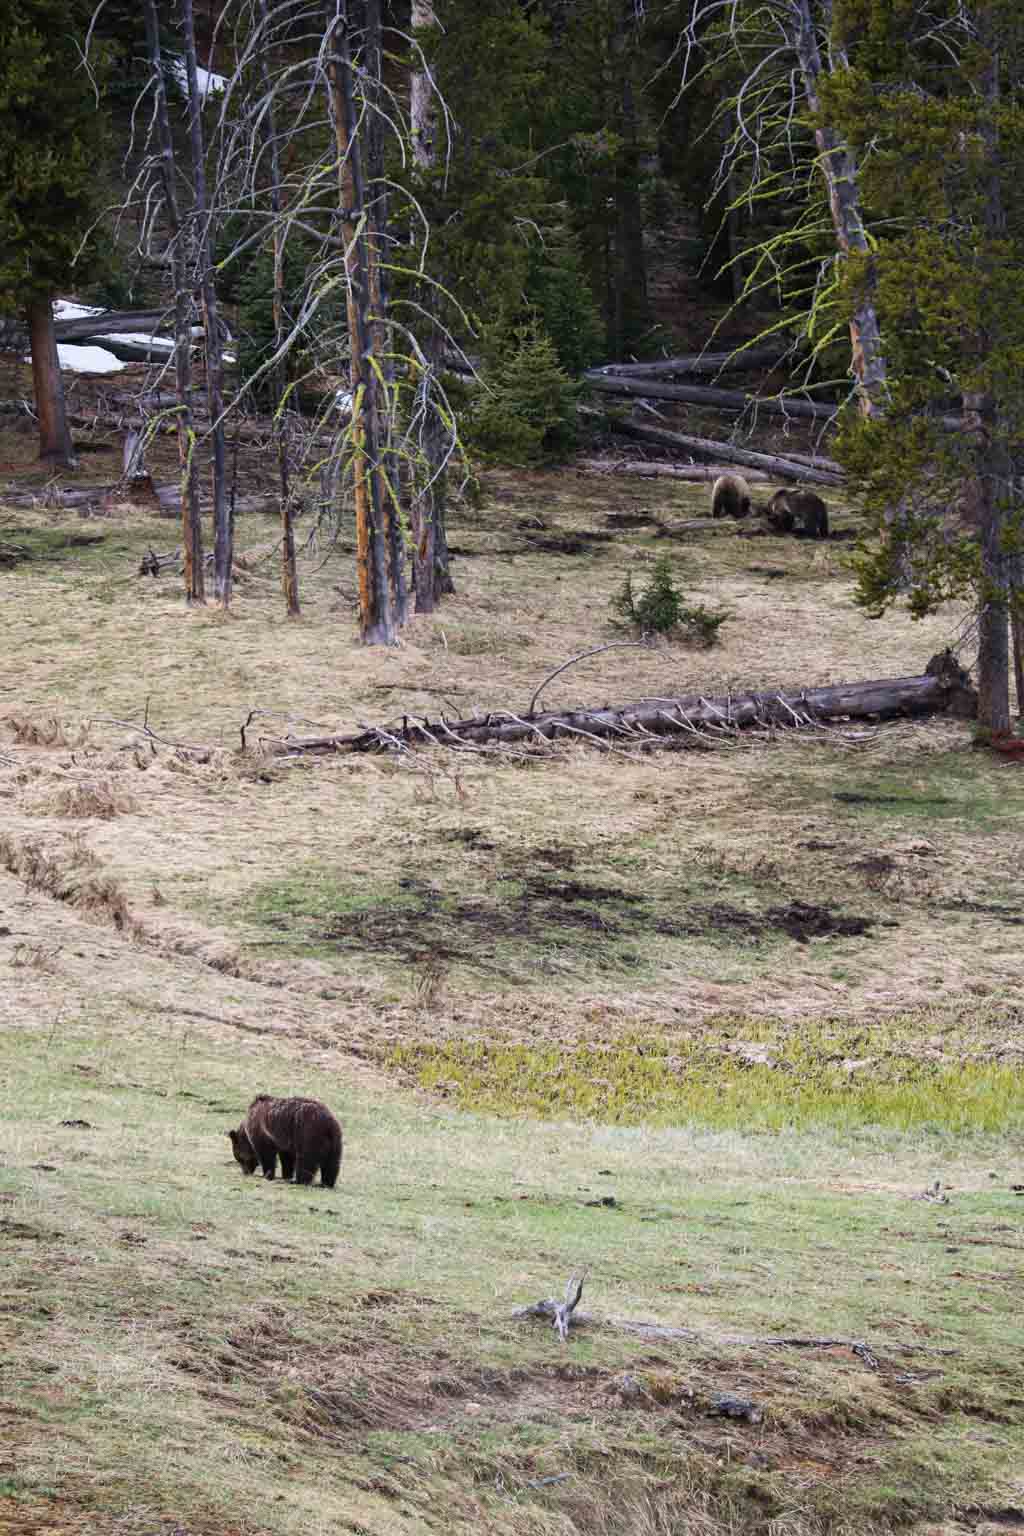 Grizzly bear sow with cubs near Norris, Yellowstone National Park